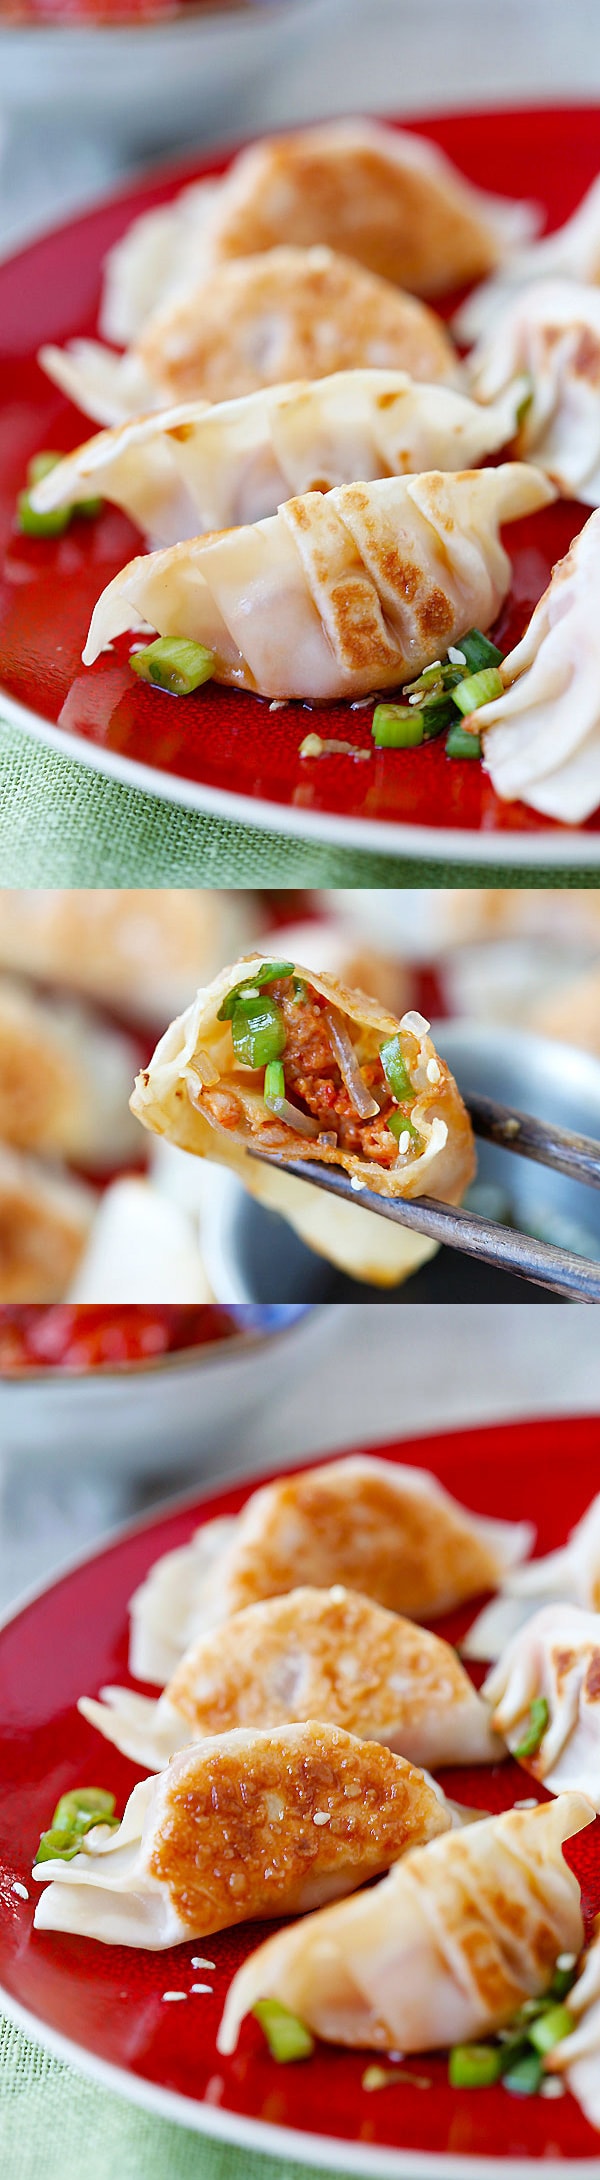 Kimchi Dumplings - Spice up your dumplings by adding kimchi to make juicy, plump and delicious dumplings that you just can't stop eating!! | rasamalaysia.com